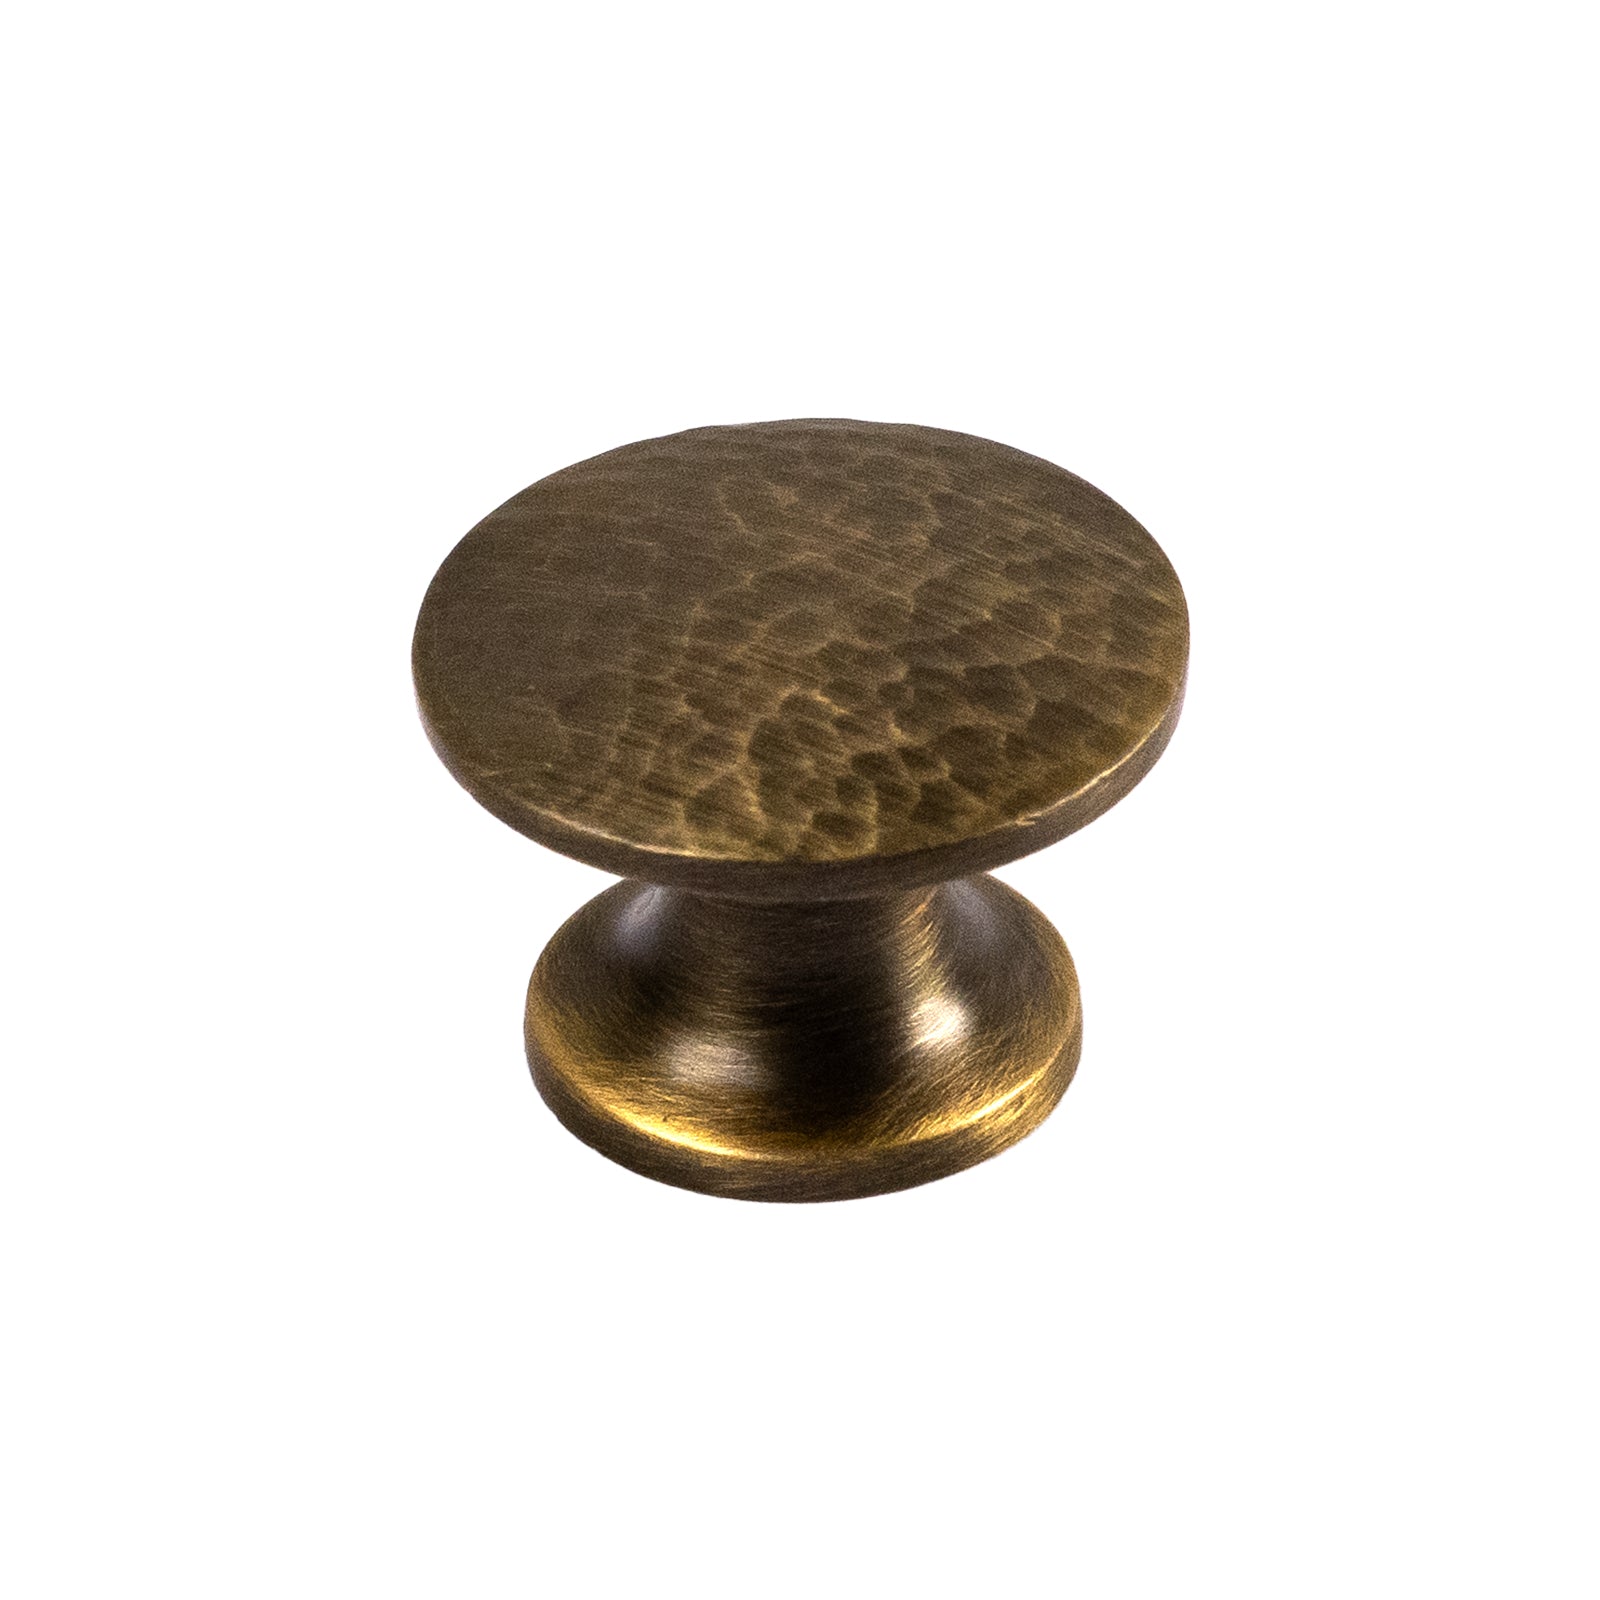 Hammered Classic Cabinet Knobs in Antique Brass 31mm